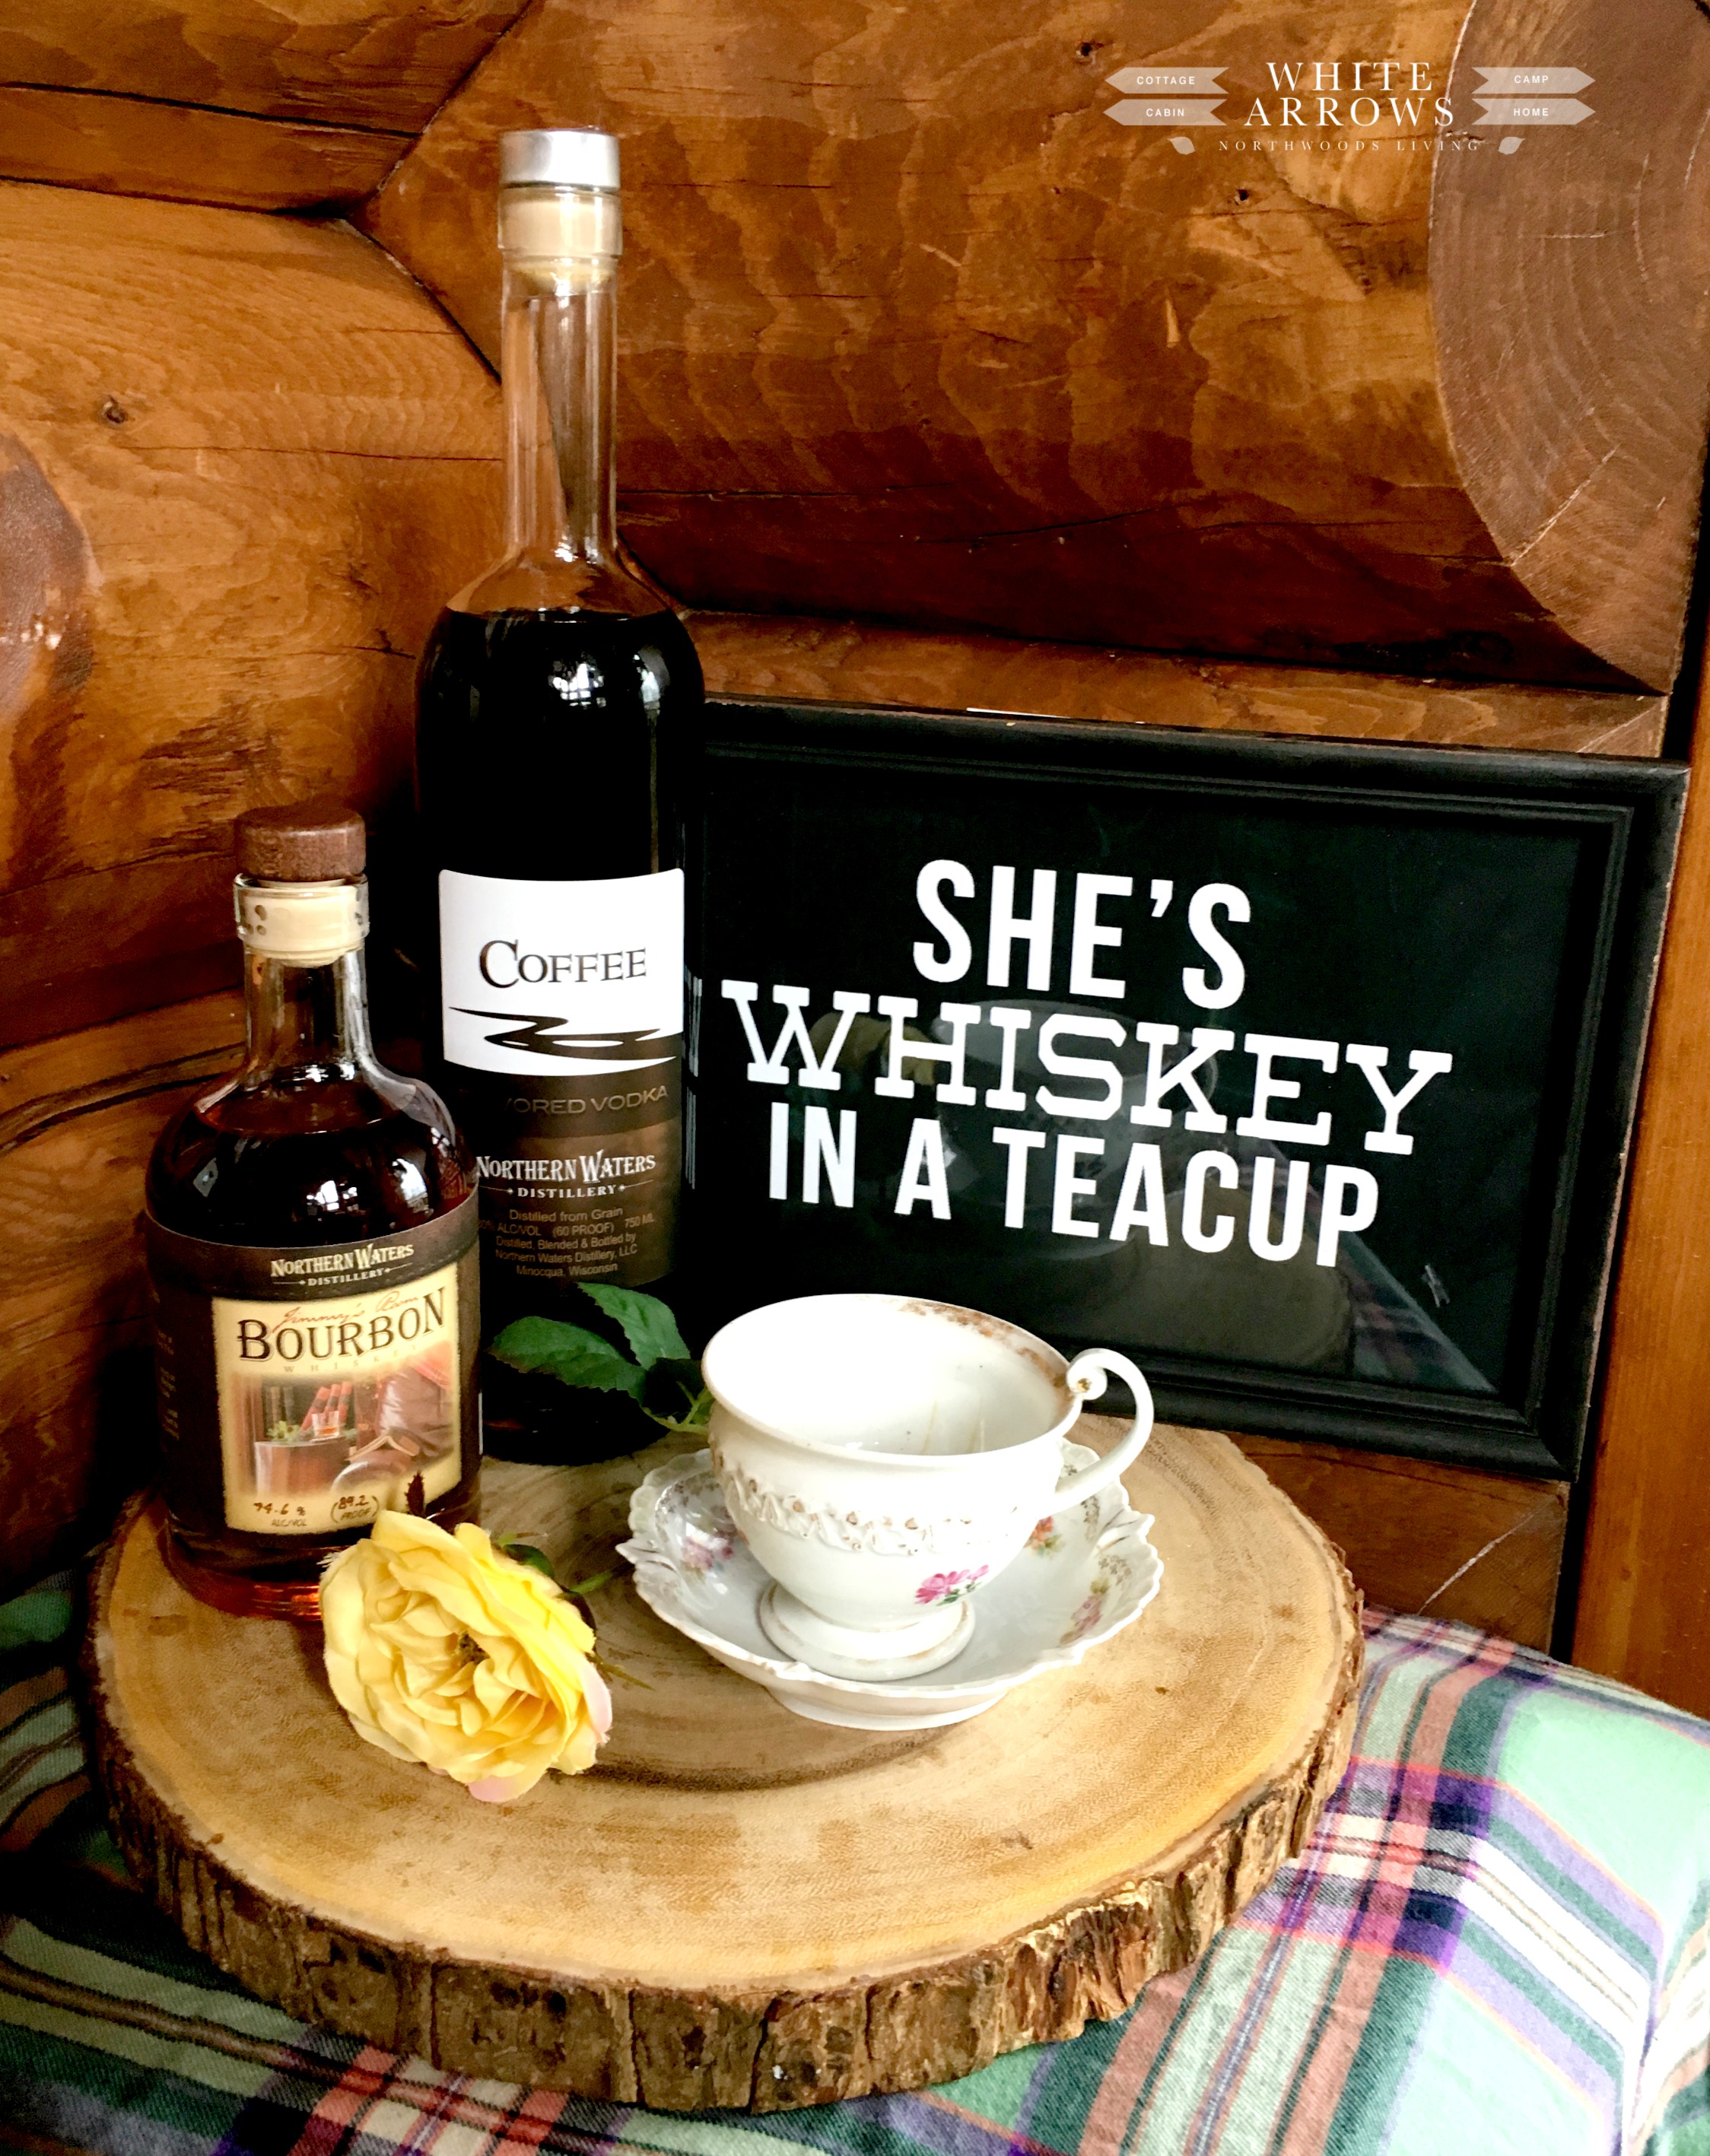 a whiskey in a teacup